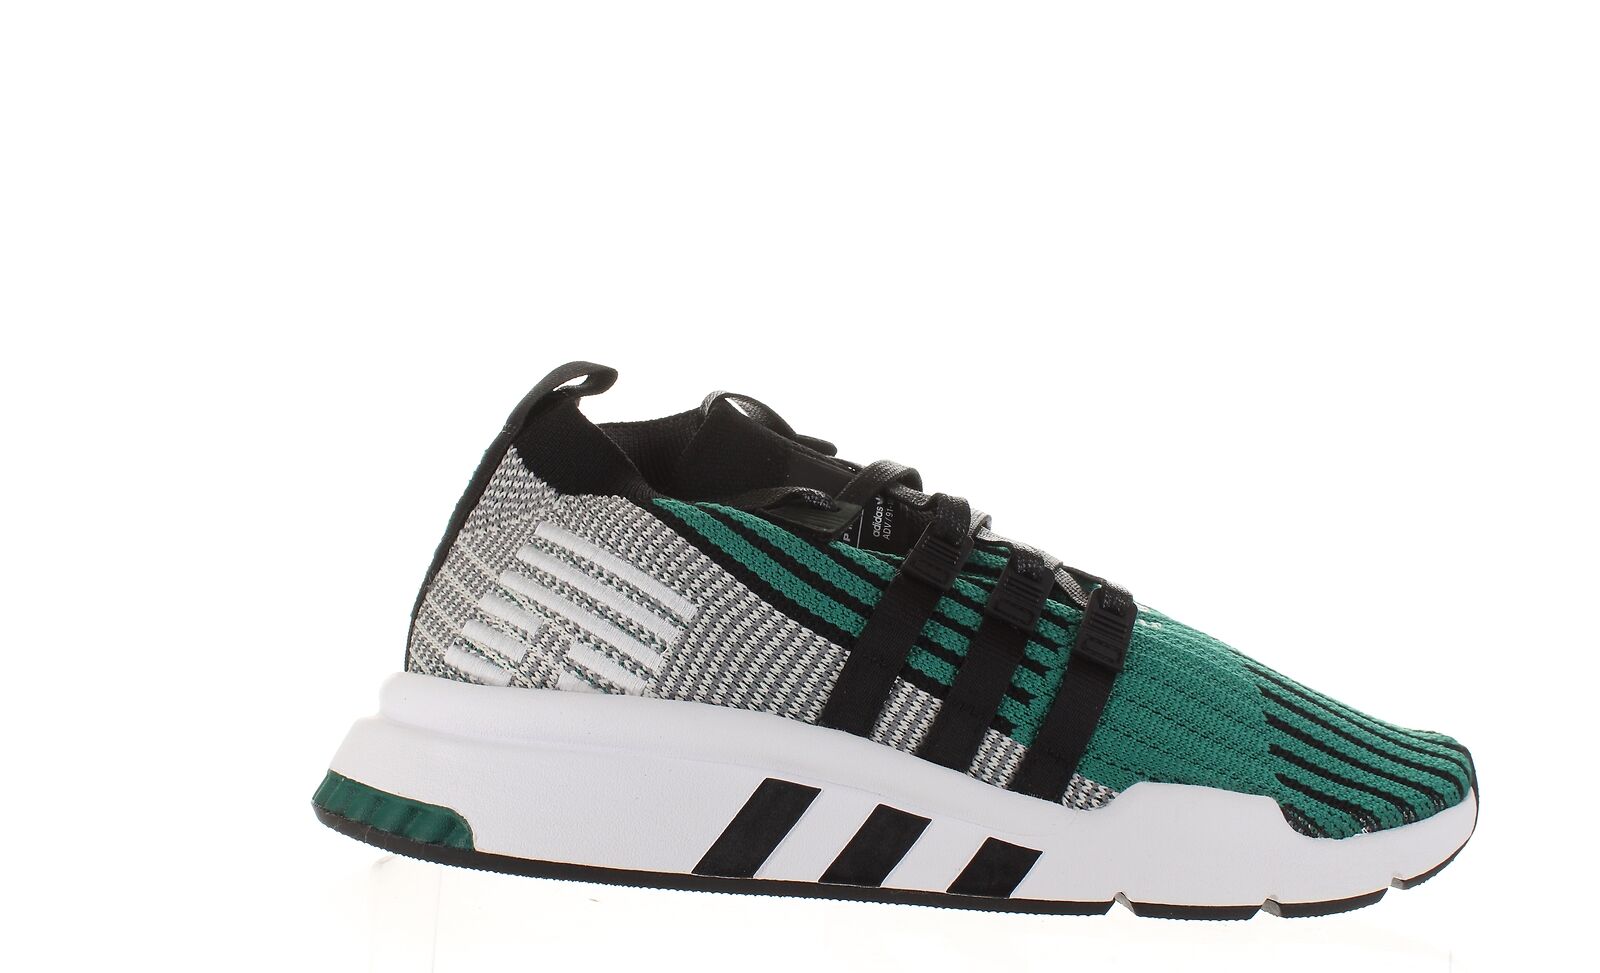 Adidas Mens Eqt Support Core Black/Sub Green Running Shoes Size 10.5 (2274363)